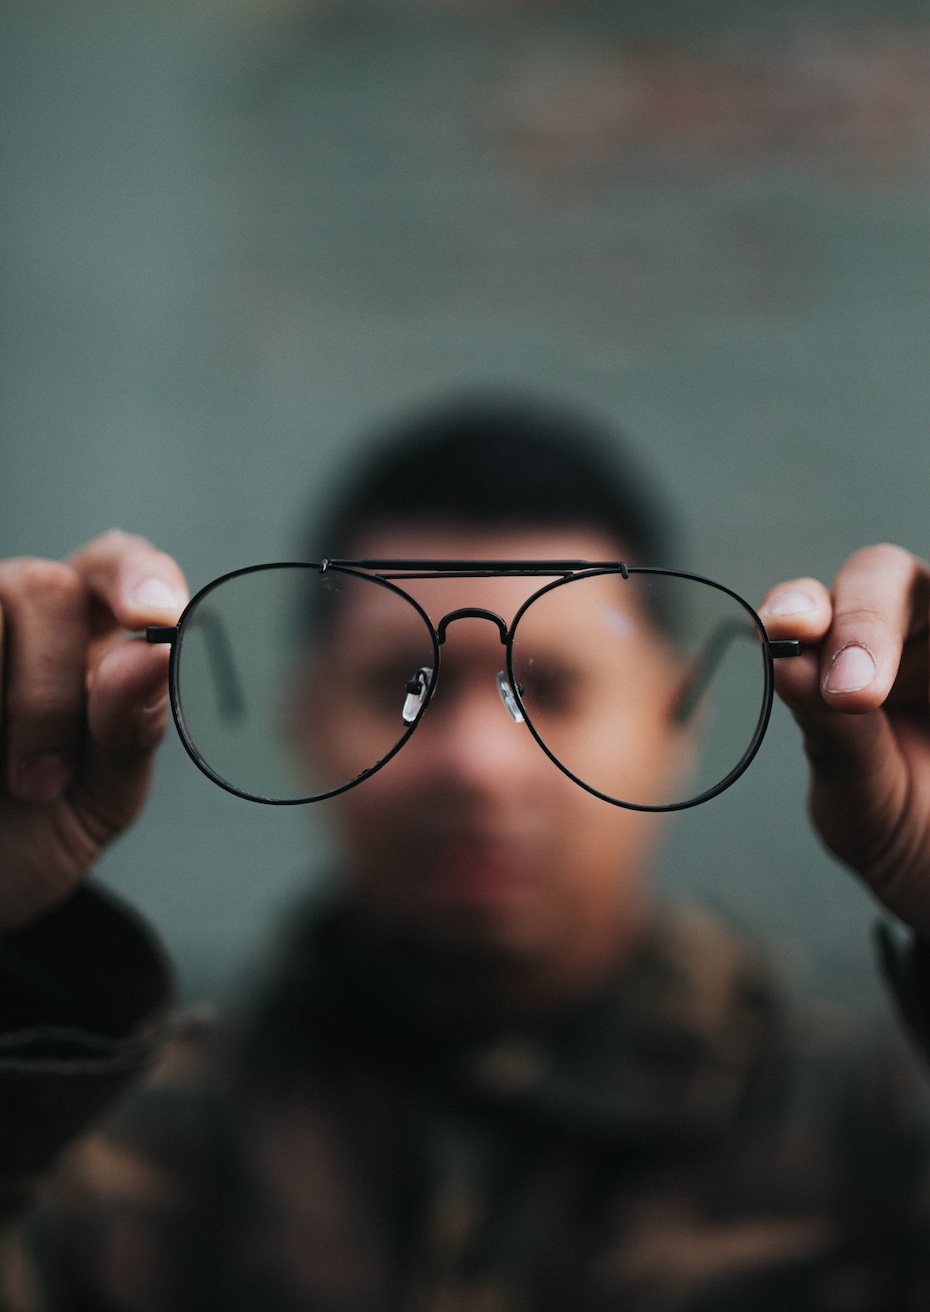 Eyeglasses in perfect focus with man holding them blurred out; image by Nathan Dumlao, via Unsplash.com.